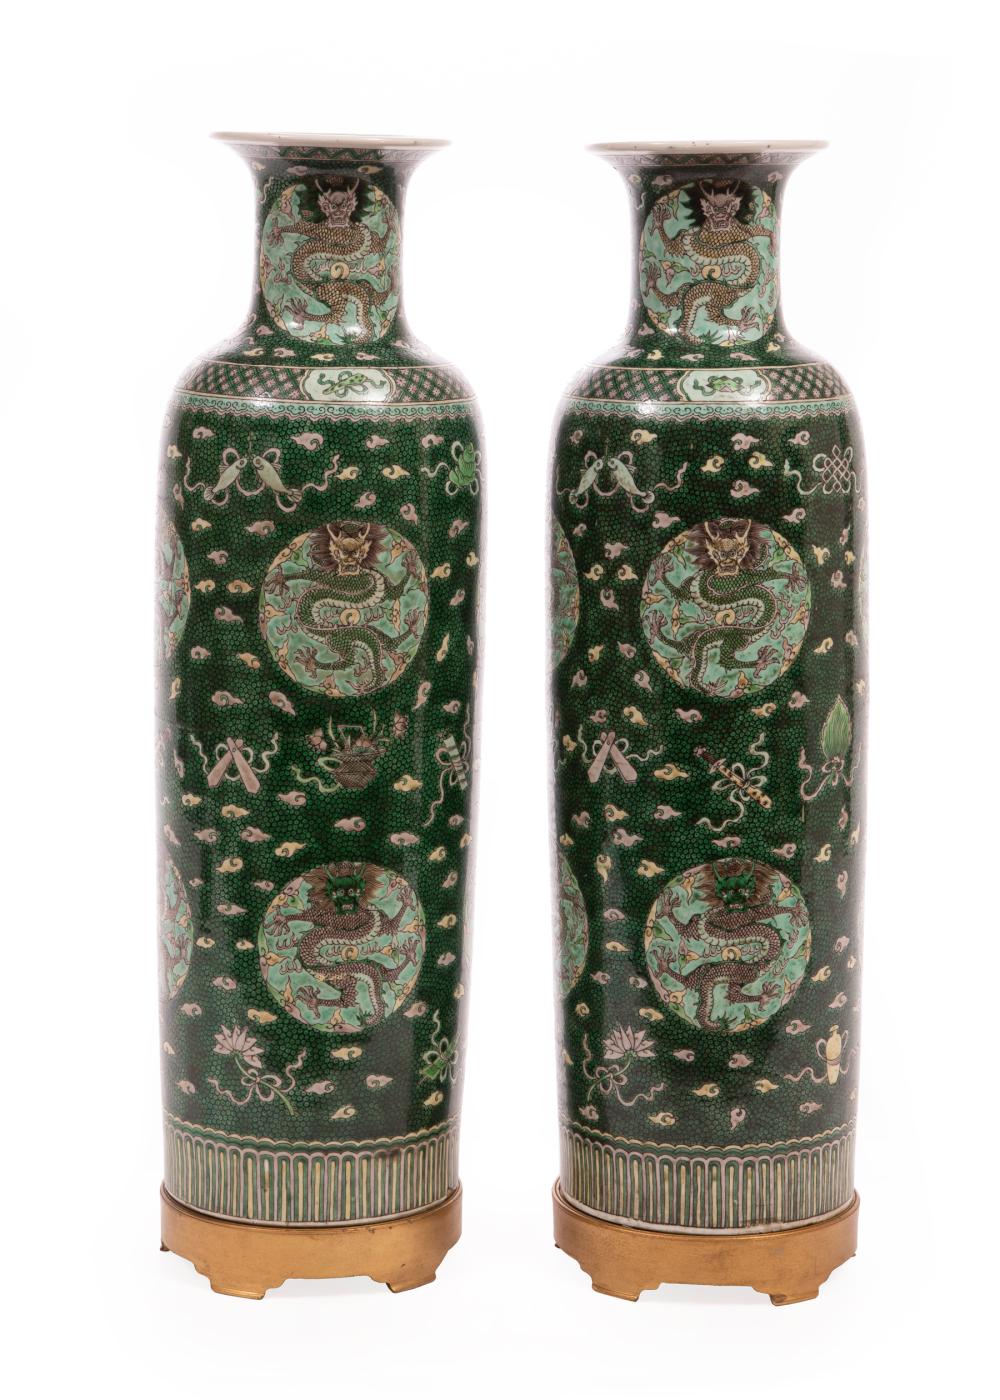 PAIR OF CHINESE PORCELAIN SLEEVE